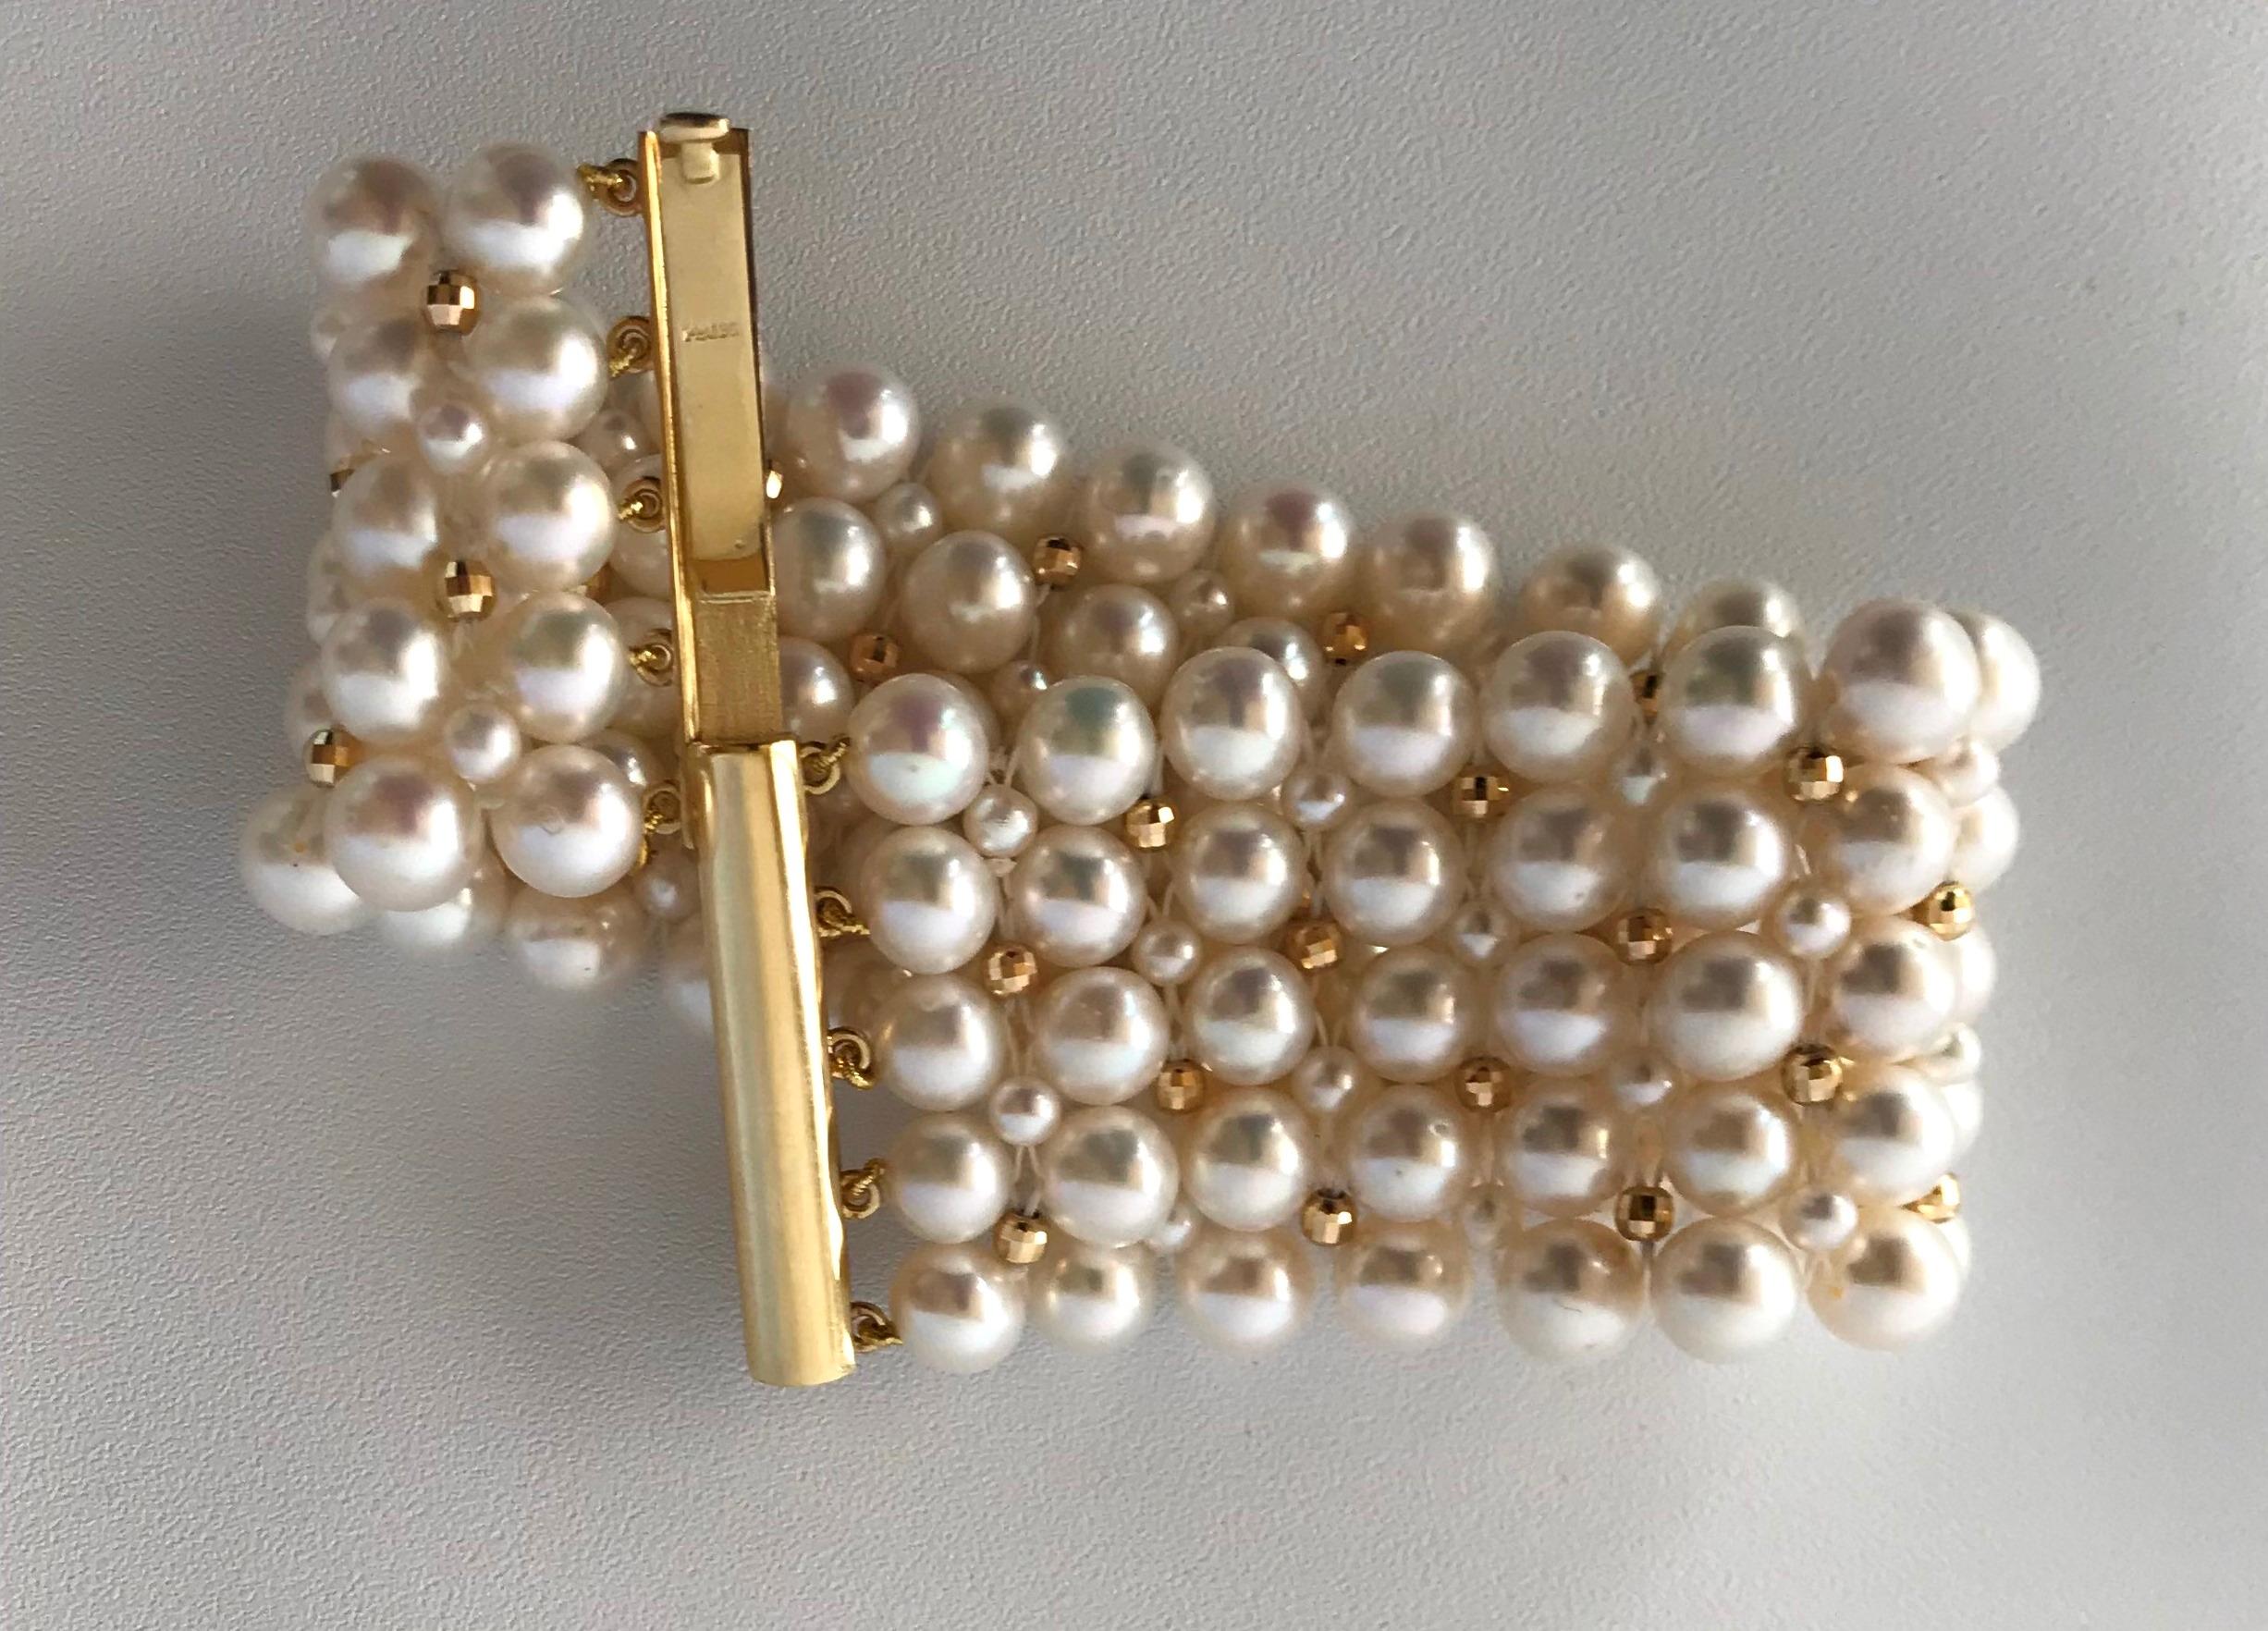 Marina J Stunning Woven Pearl Bracelet with 14 Karat Yellow Gold Beads and Clasp For Sale 3